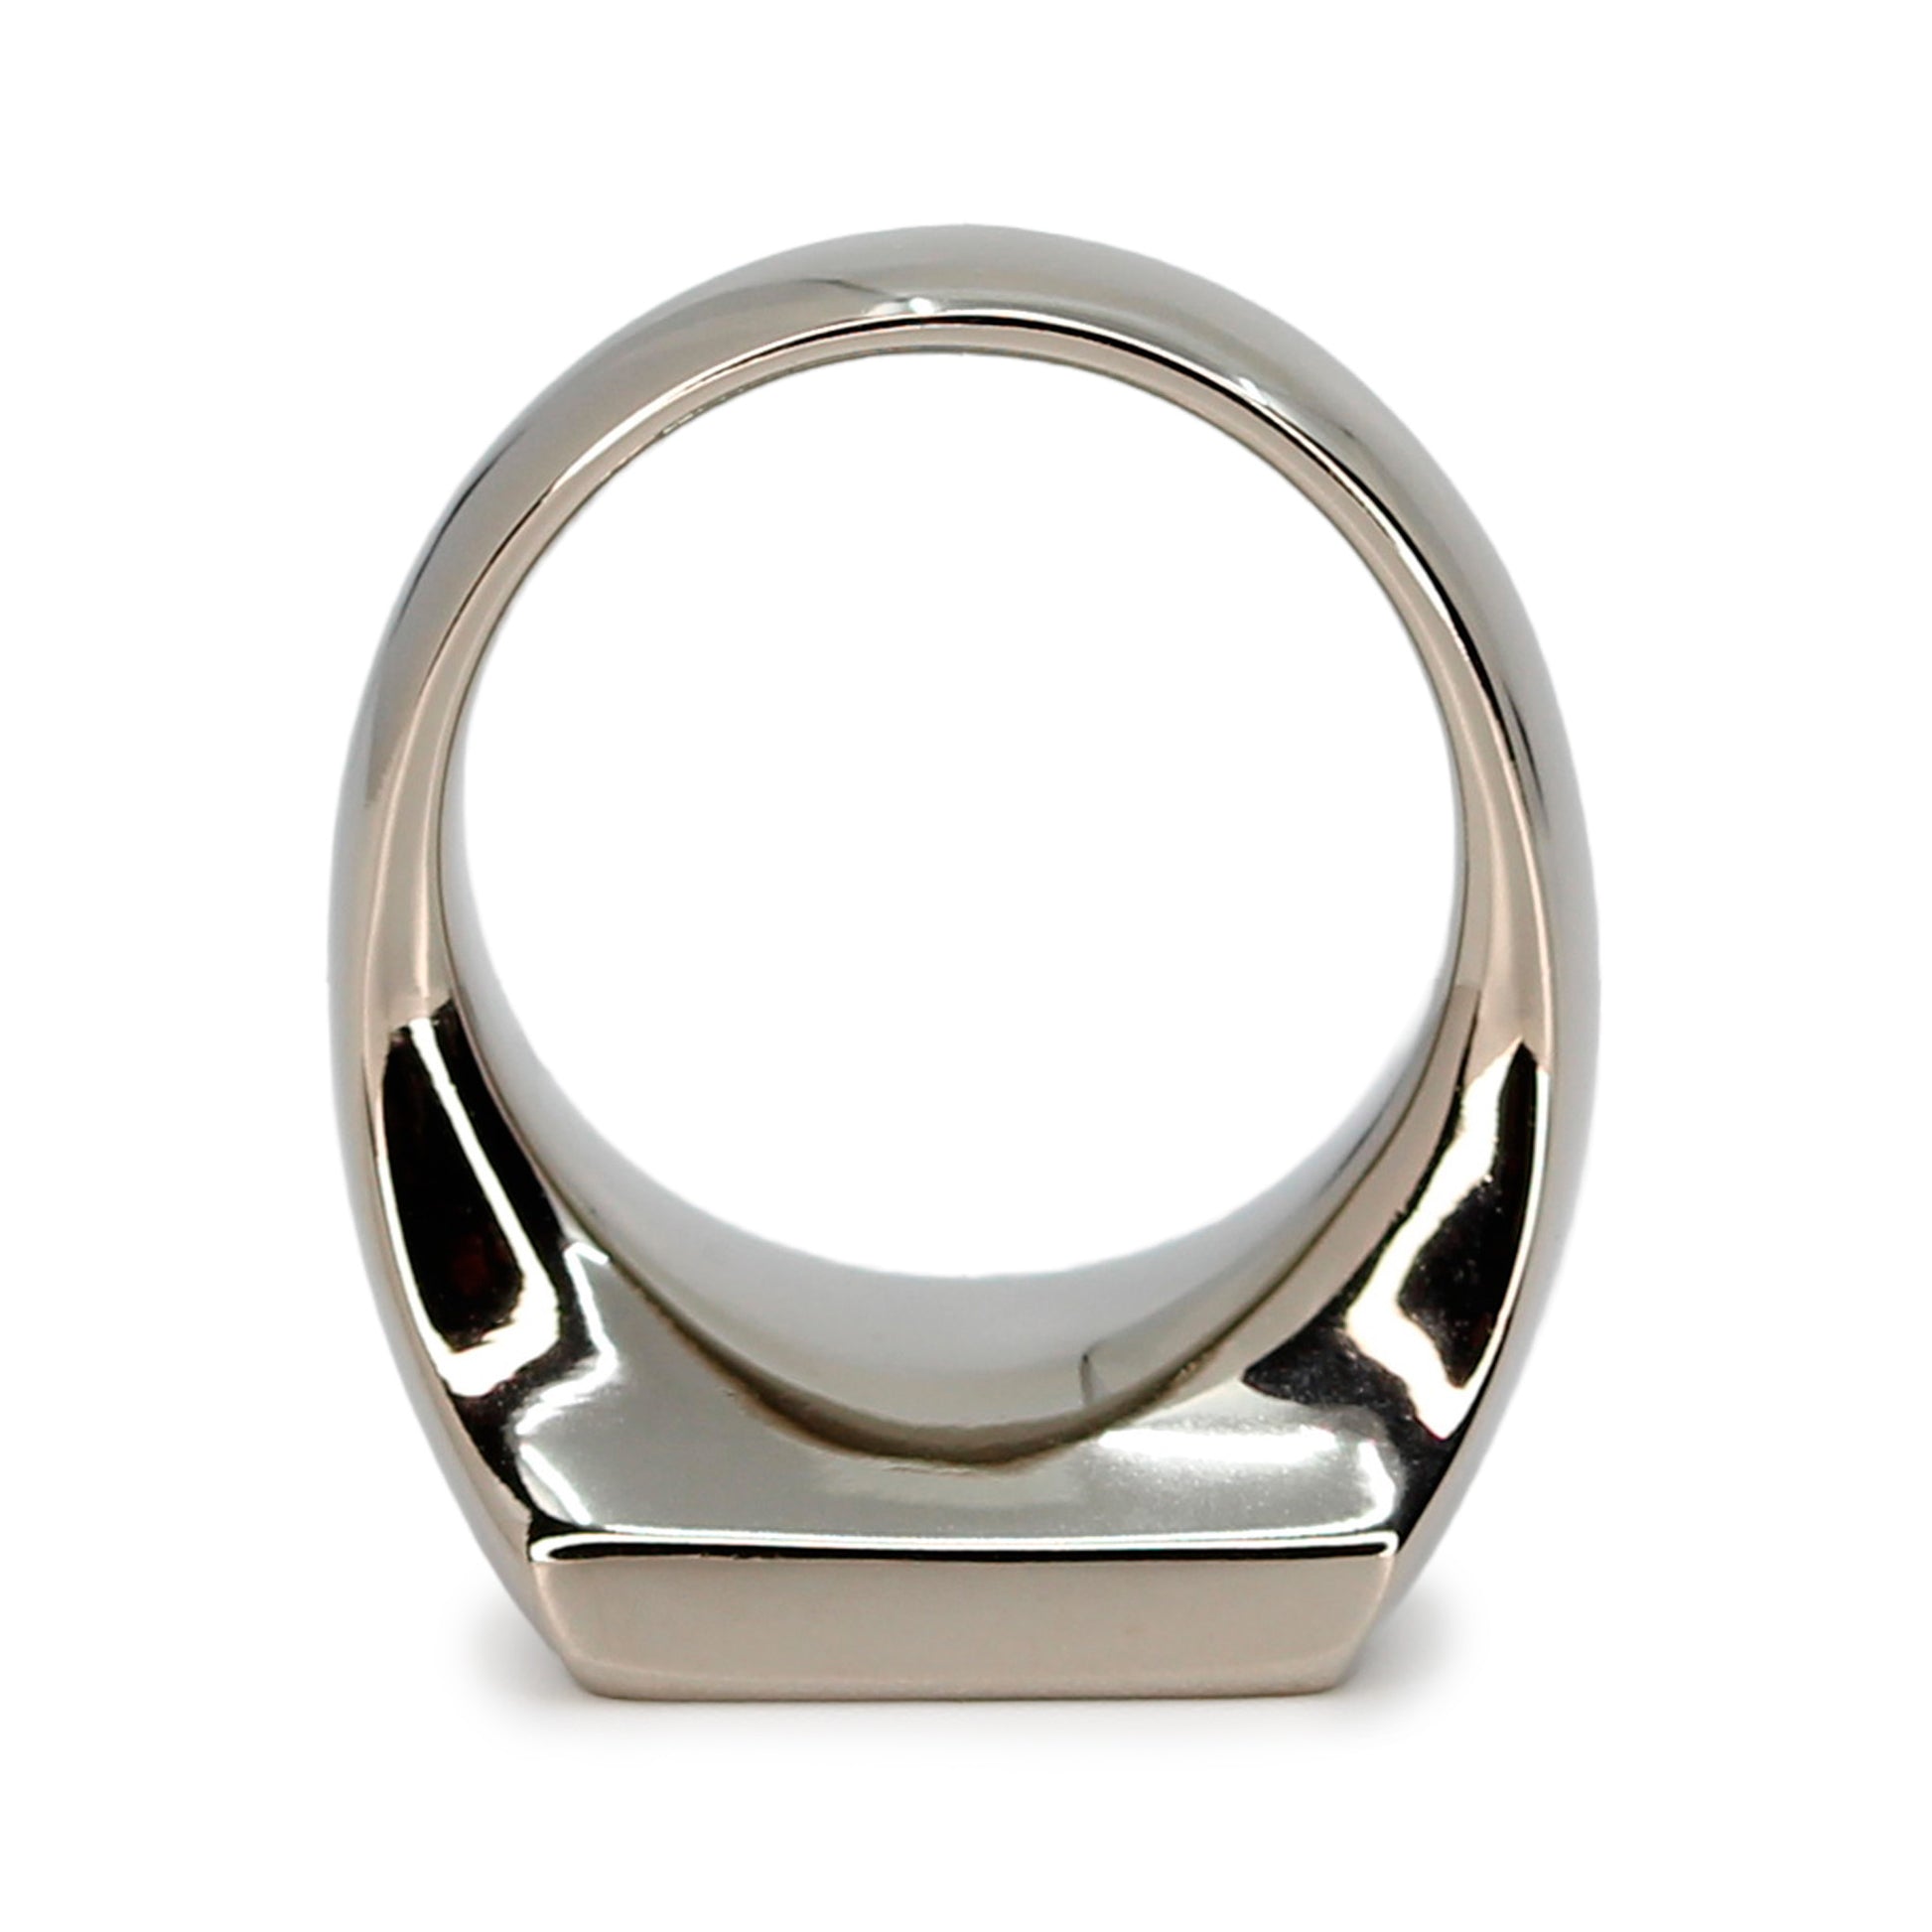 Single silver-colored titanium signet ring, 15x15 mm wide surface ring is placed with surface down.